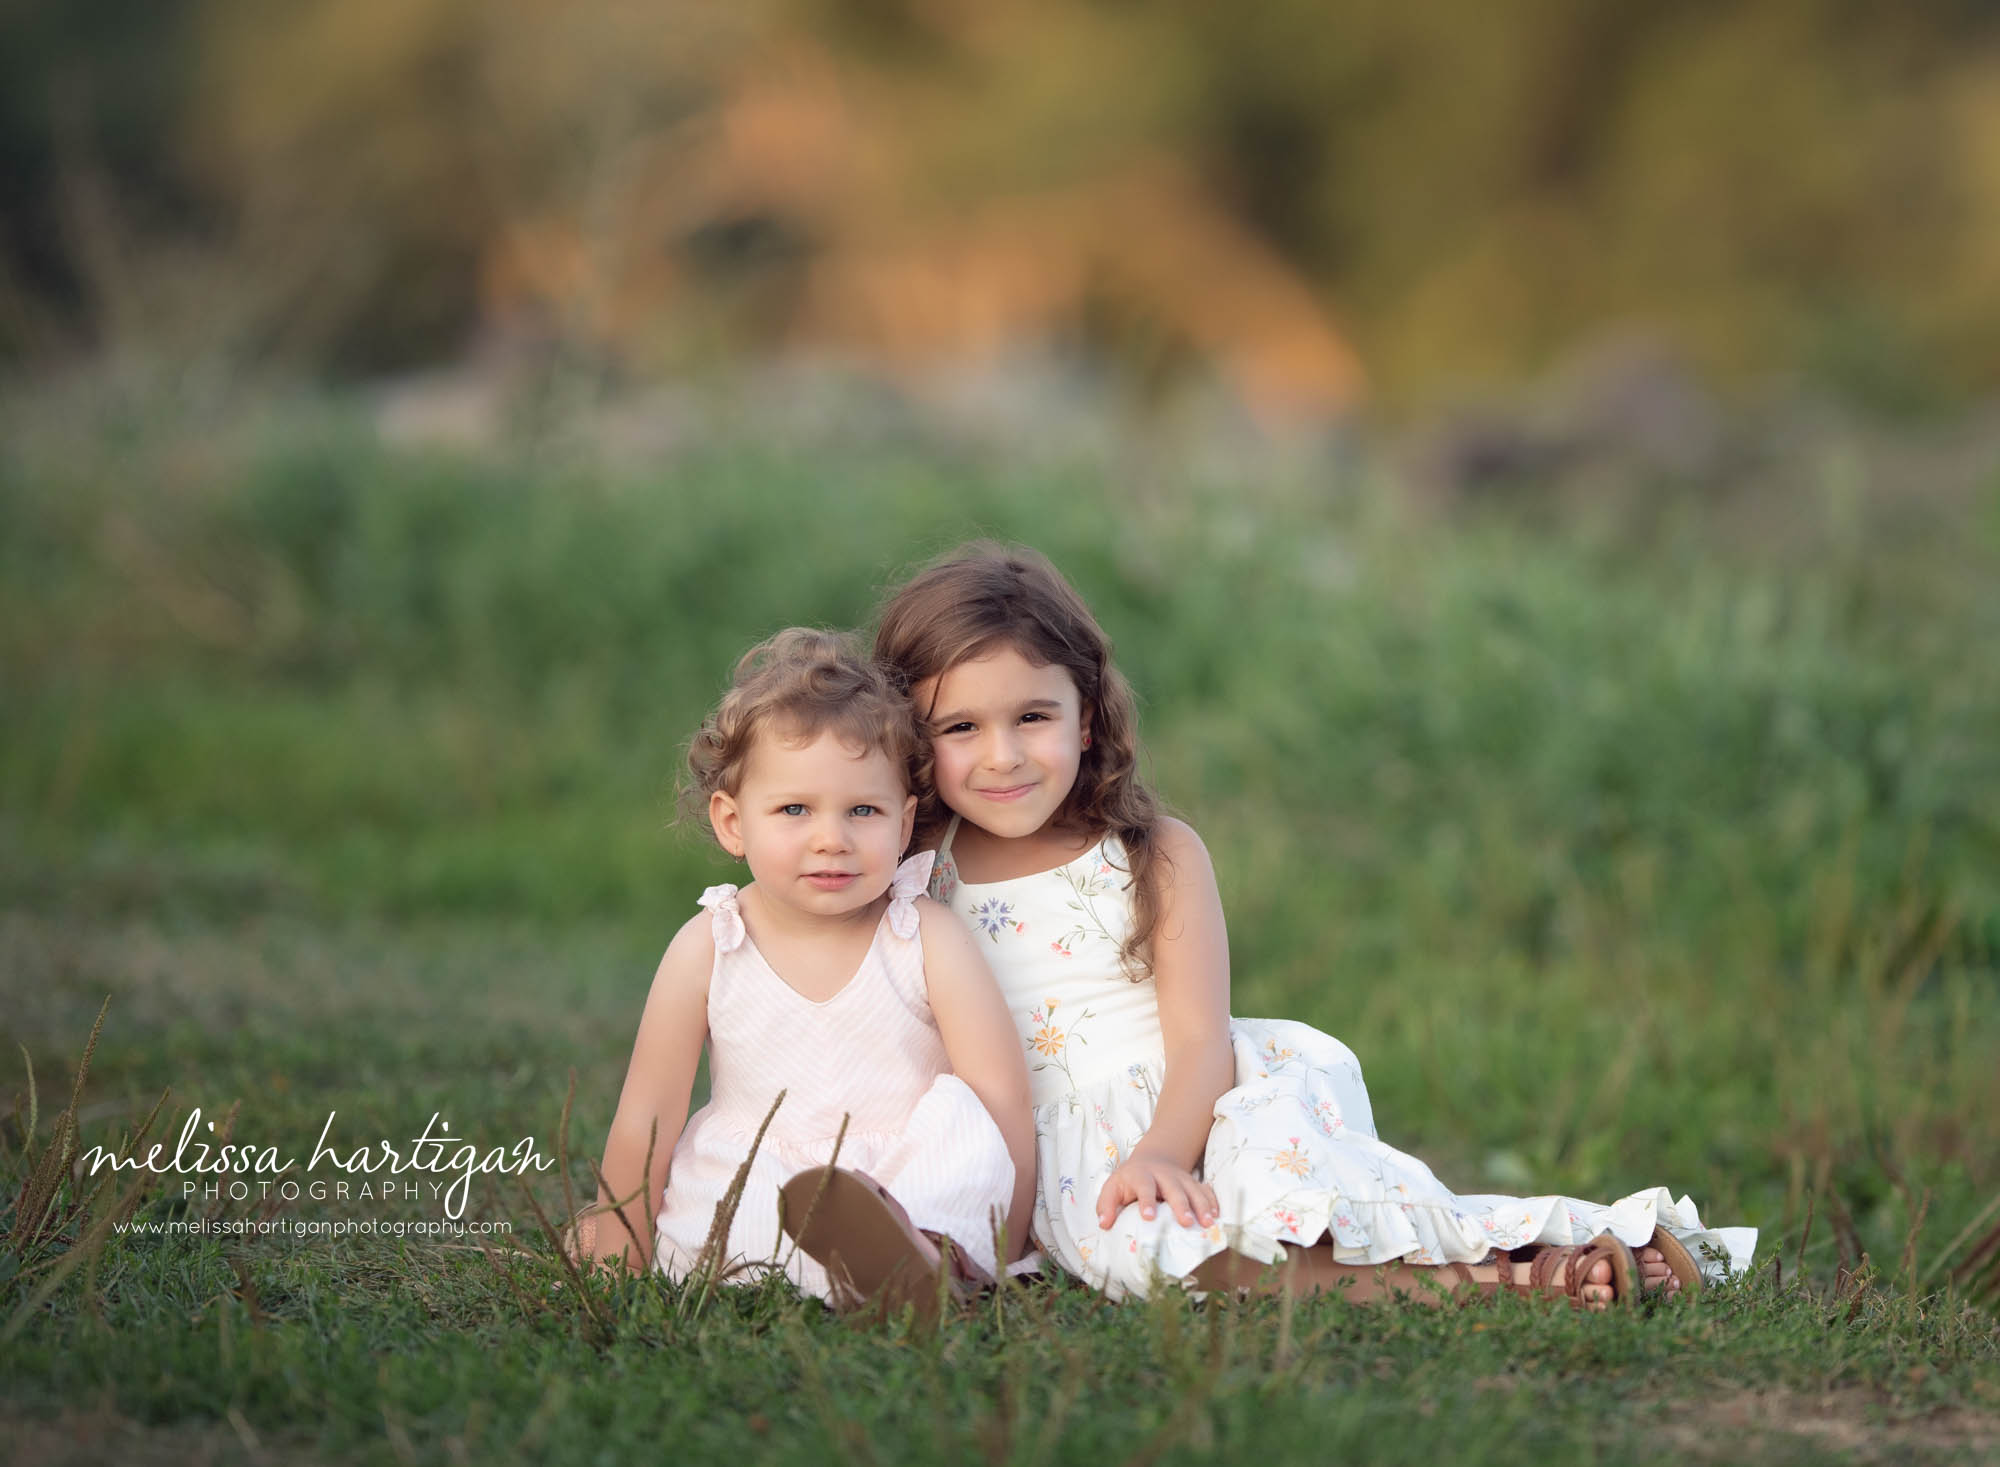 sister sitting together on grass outside family photography CT